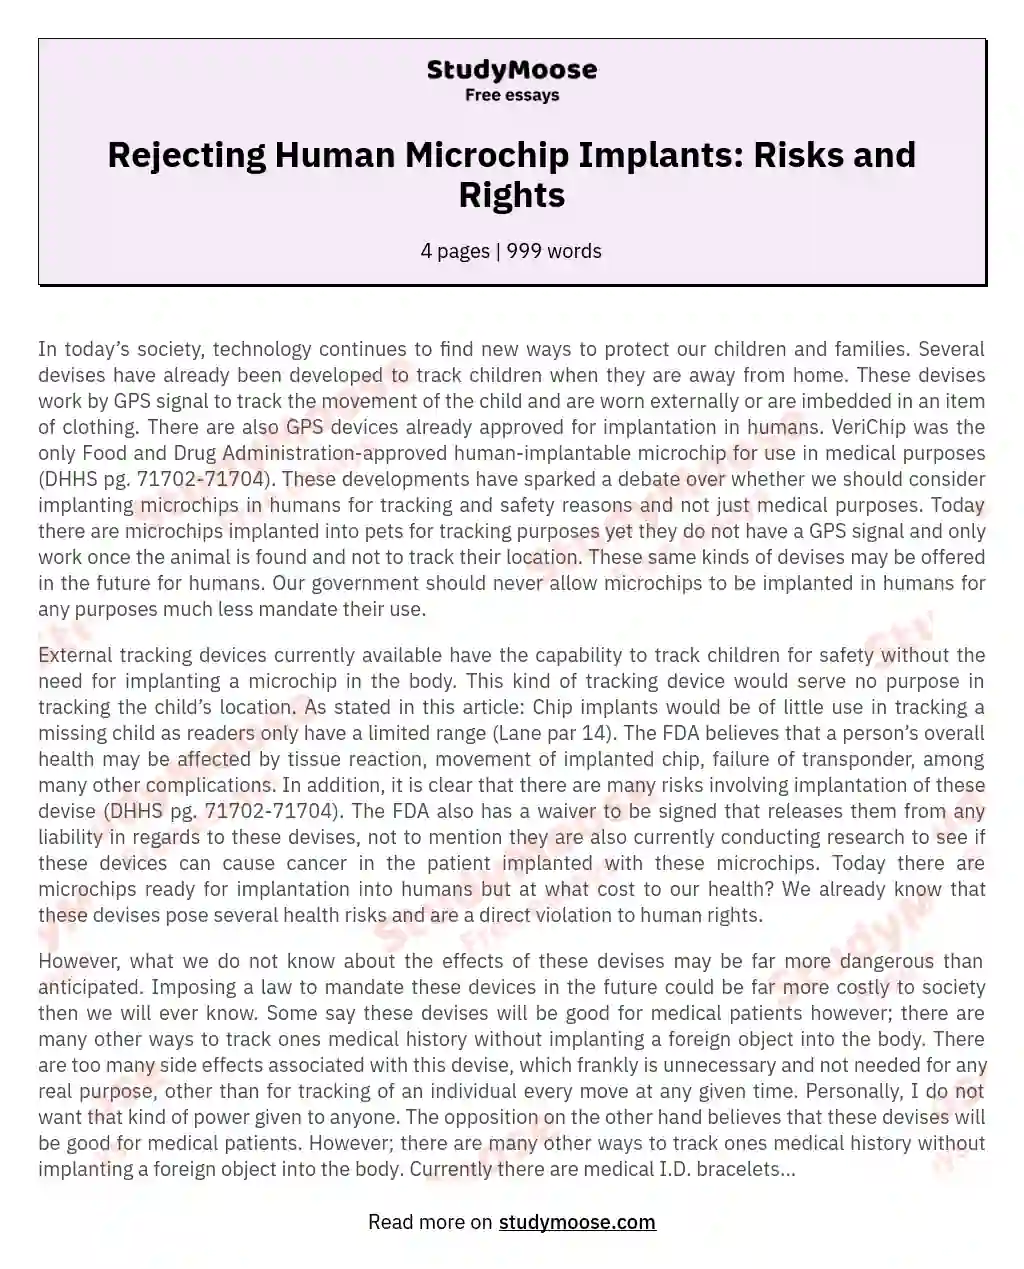 Rejecting Human Microchip Implants: Risks and Rights essay